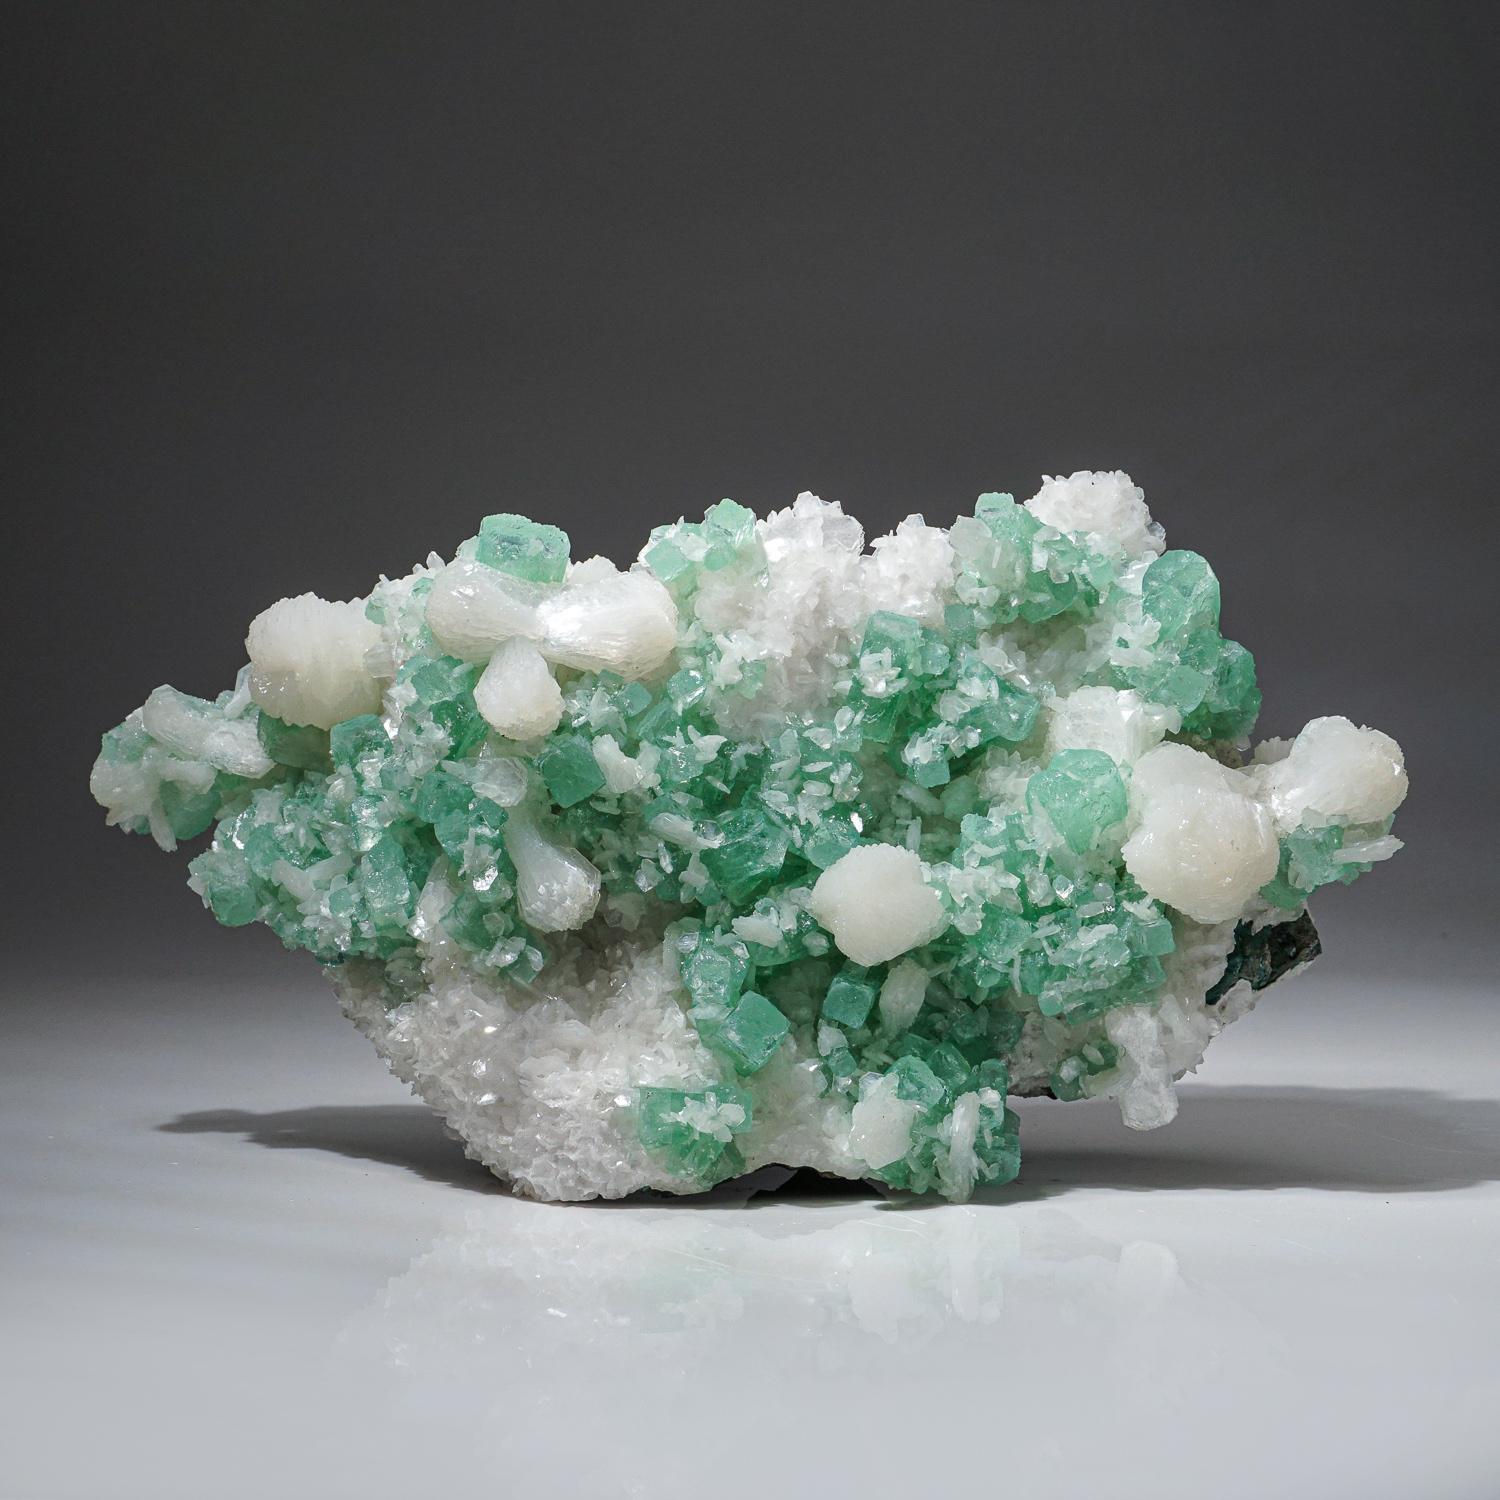 Gem Green Apophyllite with Stilbite from Aurangabad District, Maharashtra, India.

These huge, museum-quality, electric-green Apophyllite crystals are found in a perfectly terminated cluster. This electric-green color in Apophyllite is extremely